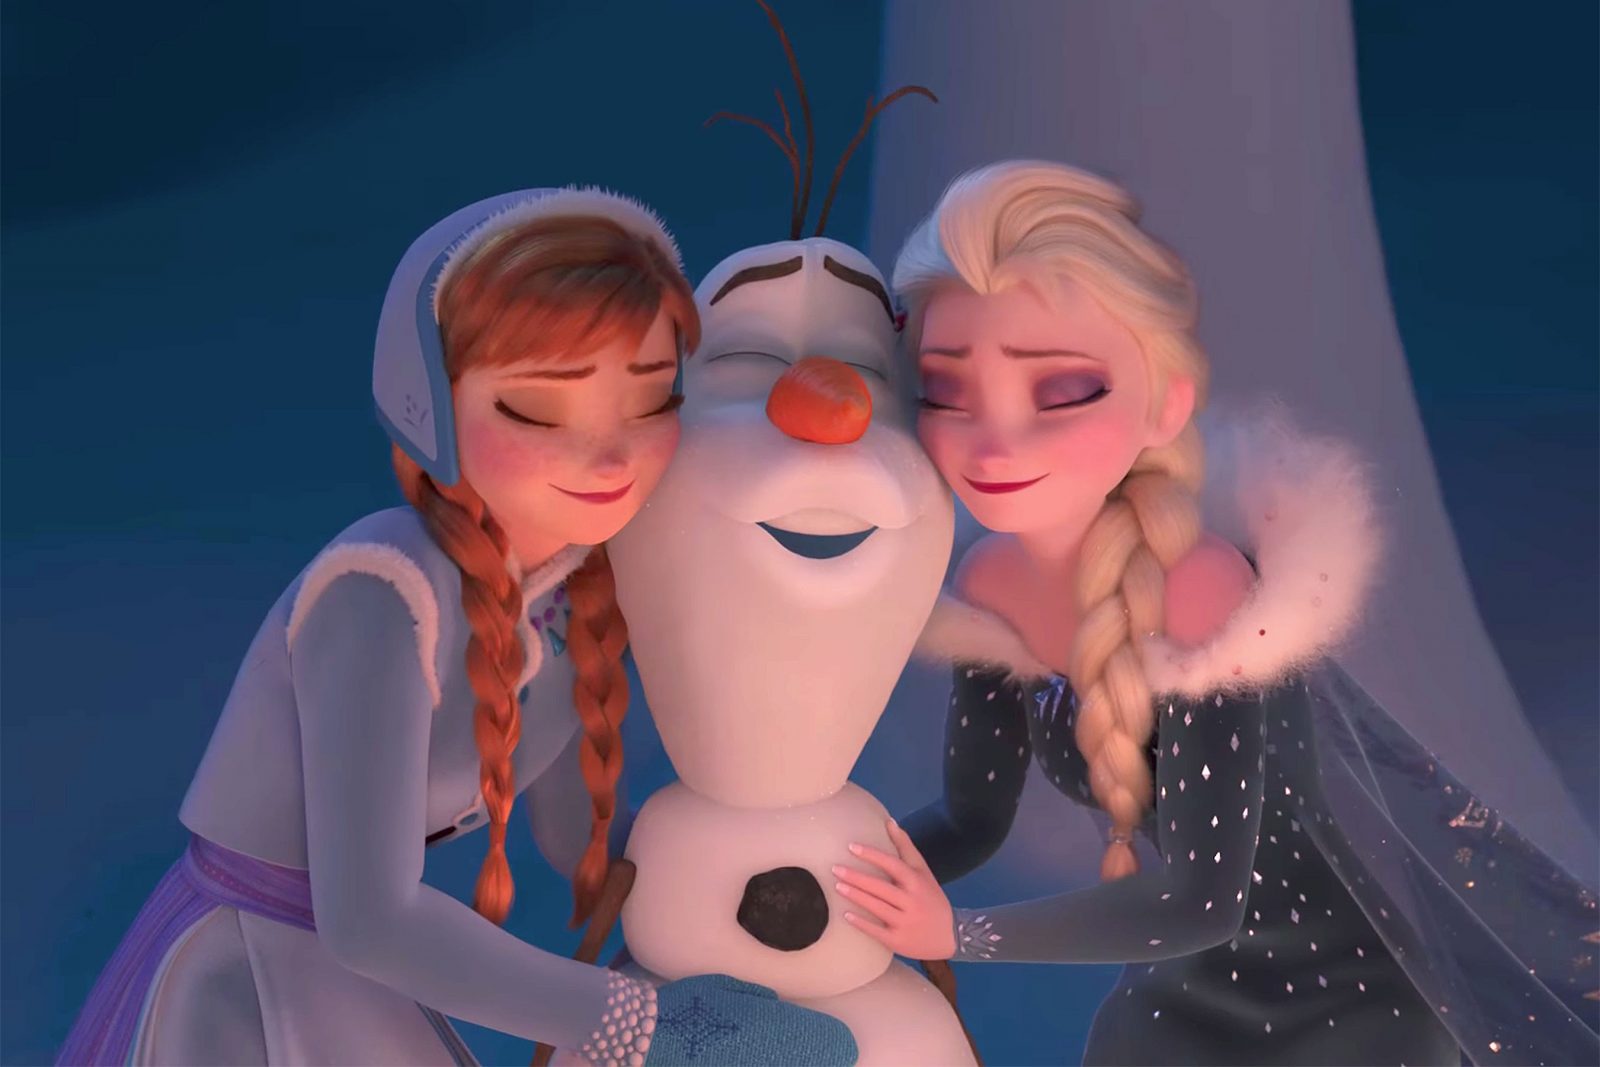 Most Disney Fans Can’t Identify More Than 15/18 of These Movie Foods – Can You? Frozen 2 movie